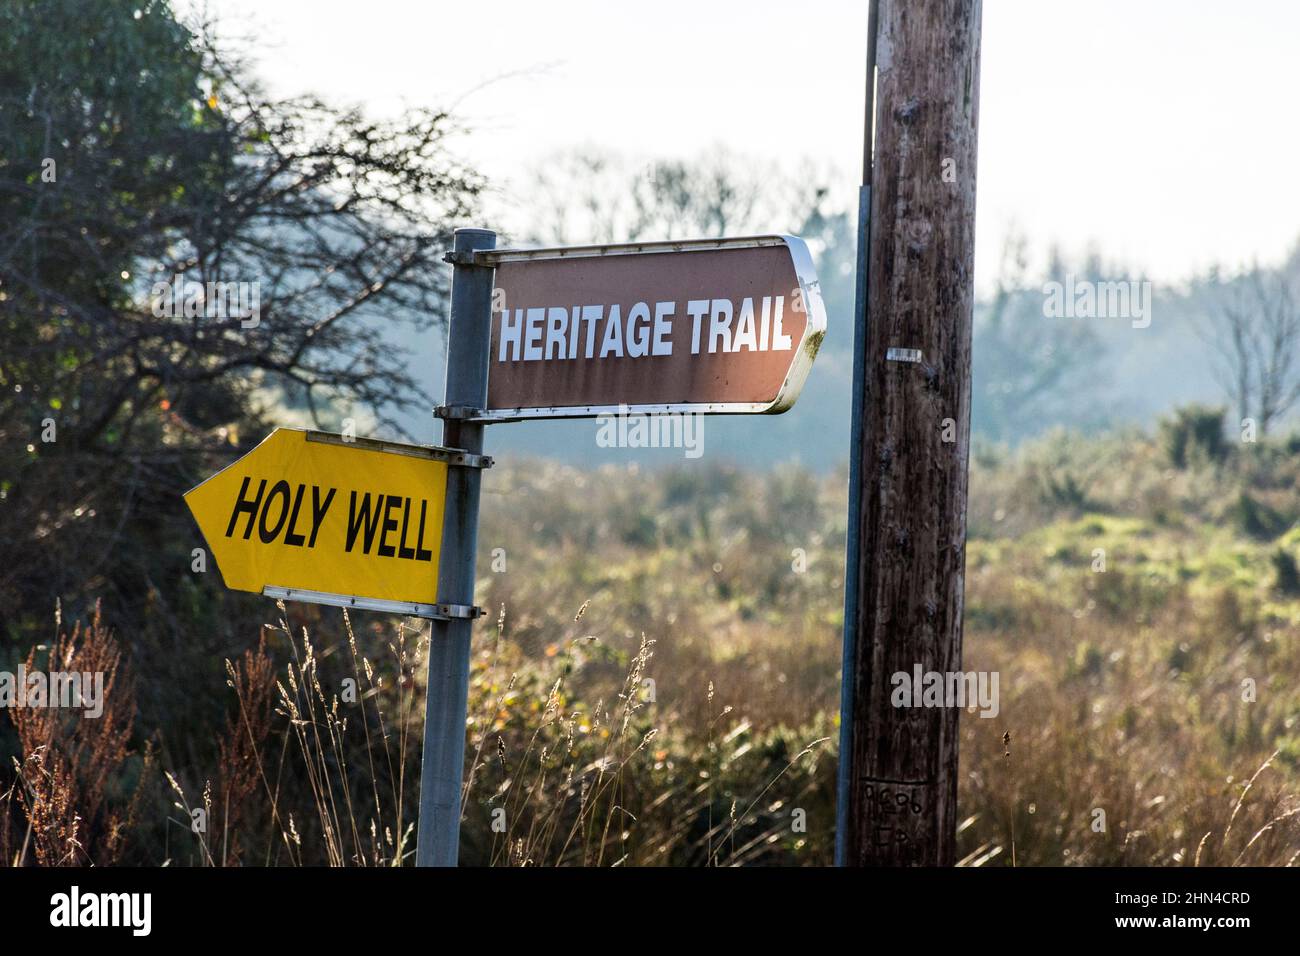 Holy Well and Heritage Trail signage, Bruckless, County Donegal, Ireland. Stock Photo